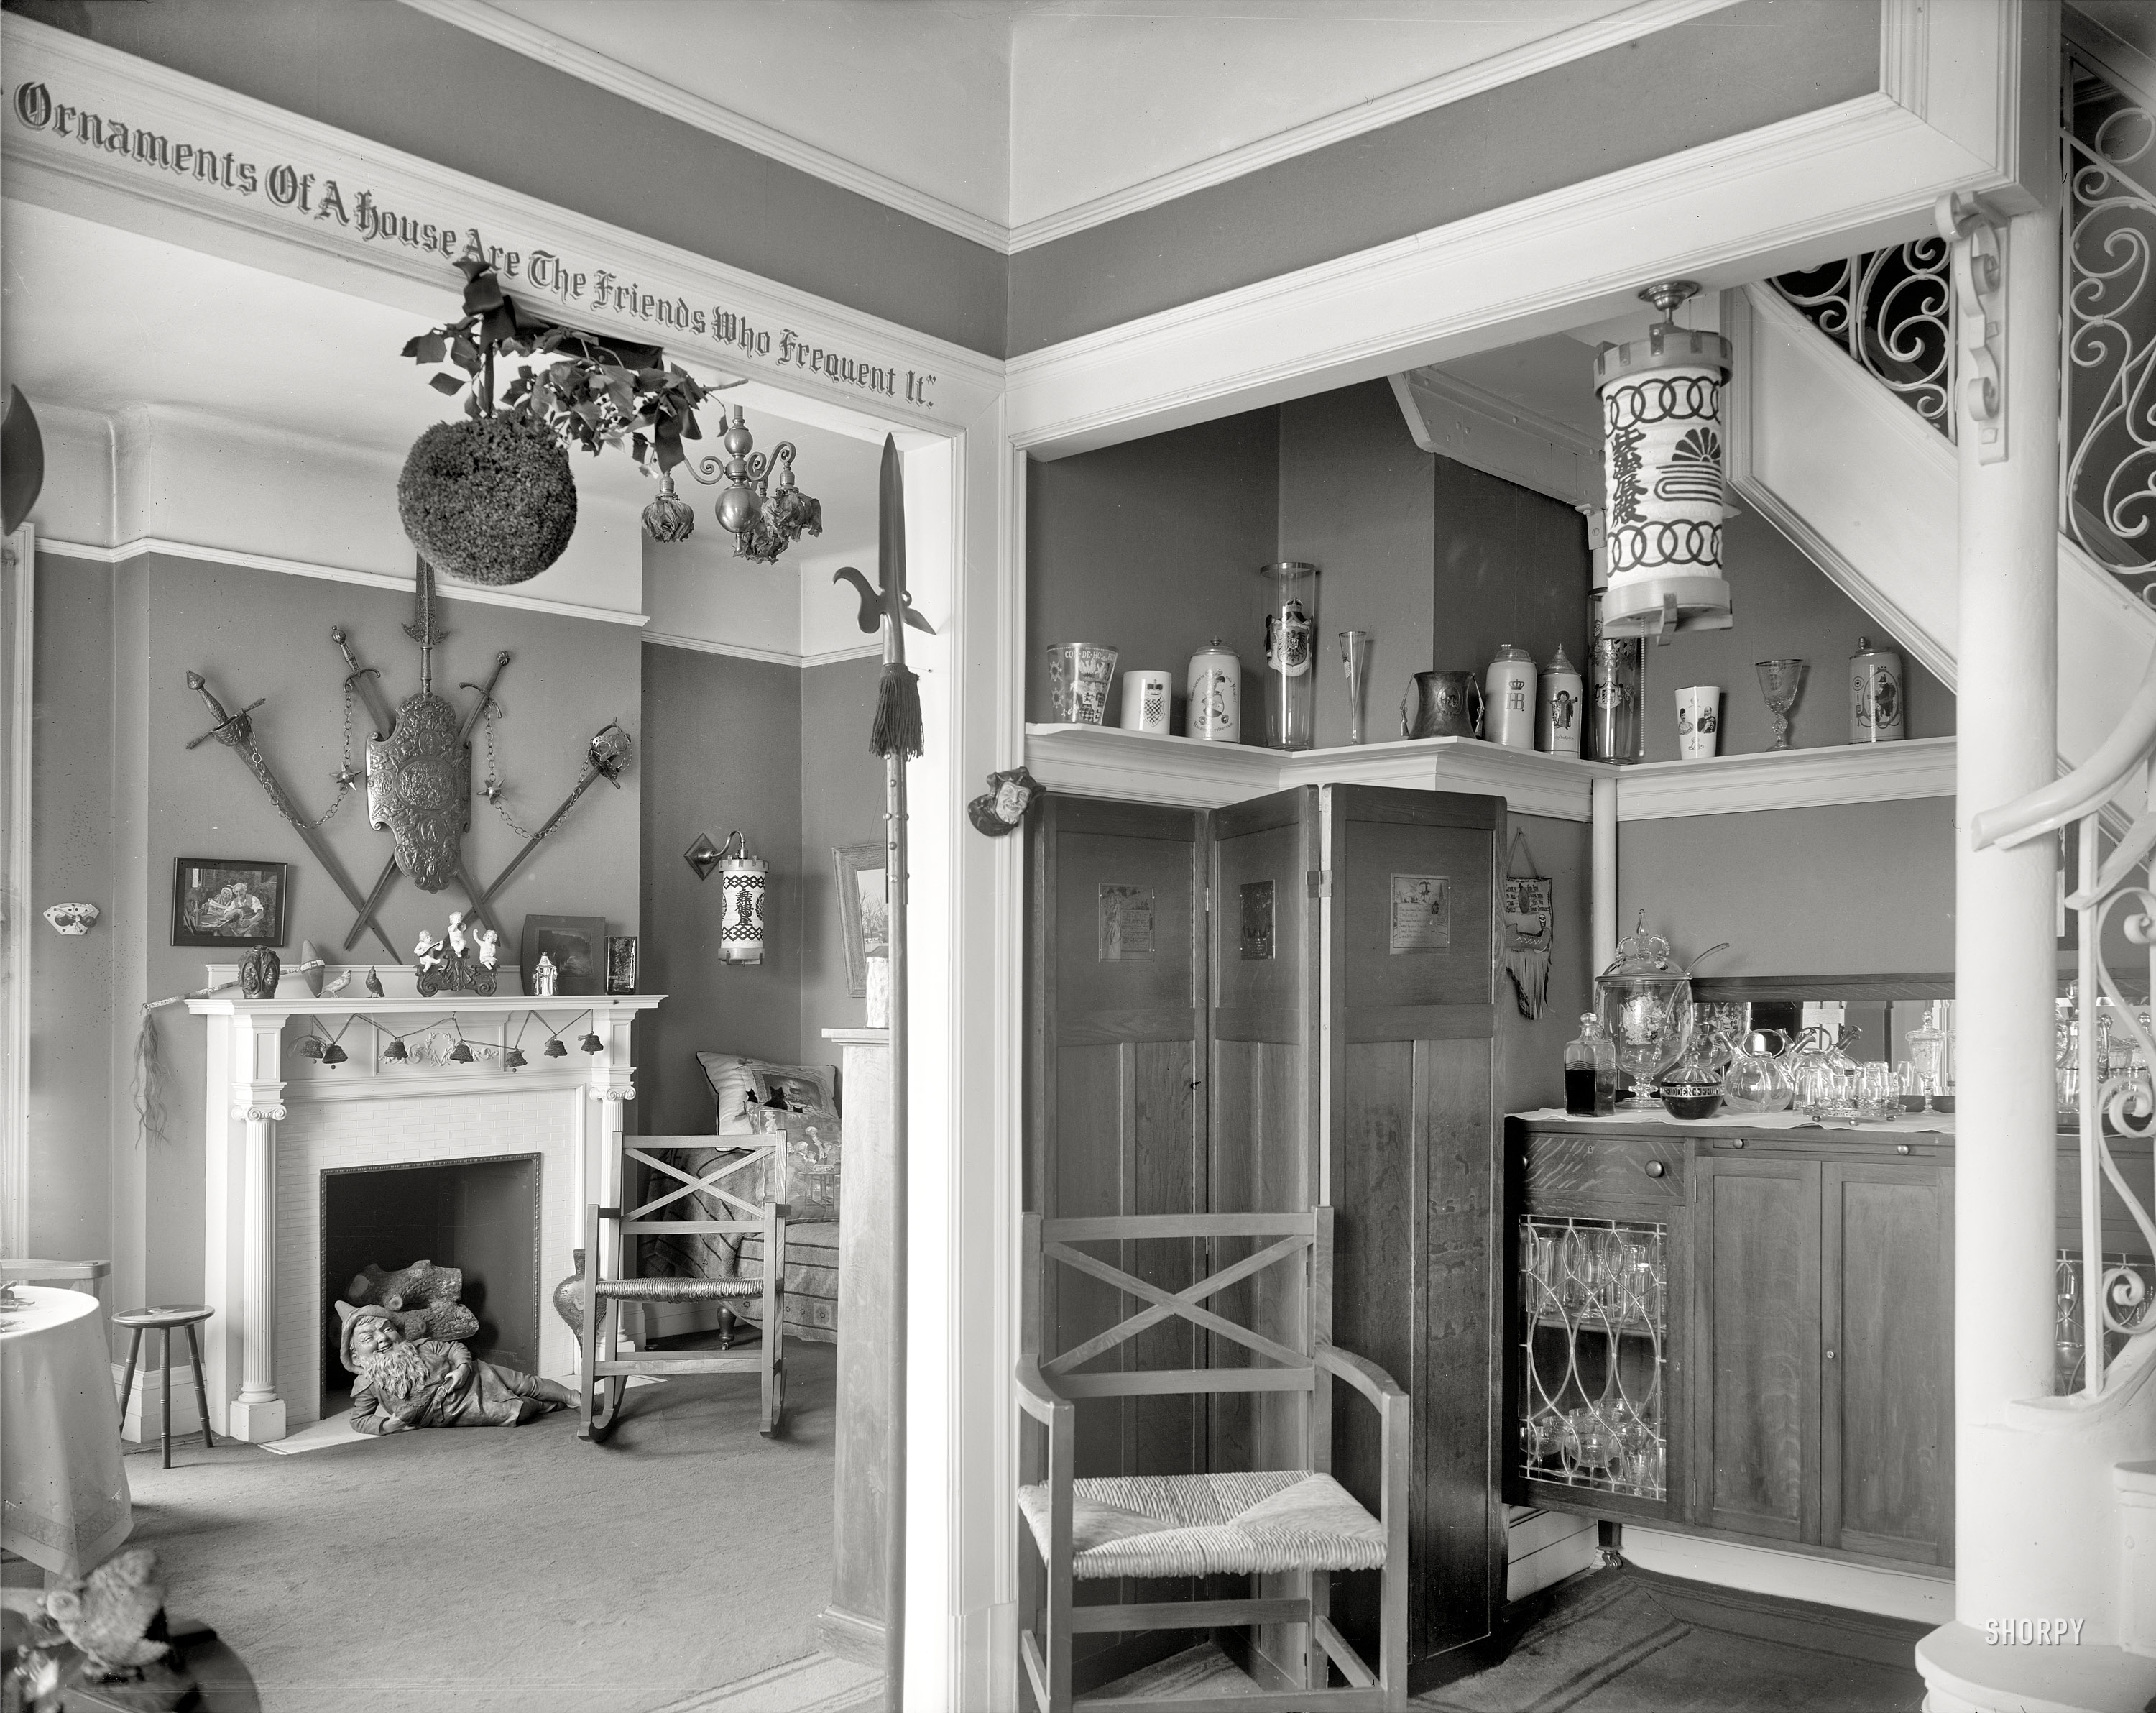 Circa 1915. "Hallway with liquor cabinet and living room decorated with mistletoe ball and Christmas gnome by fireplace." Detroit Publishing Co. View full size.